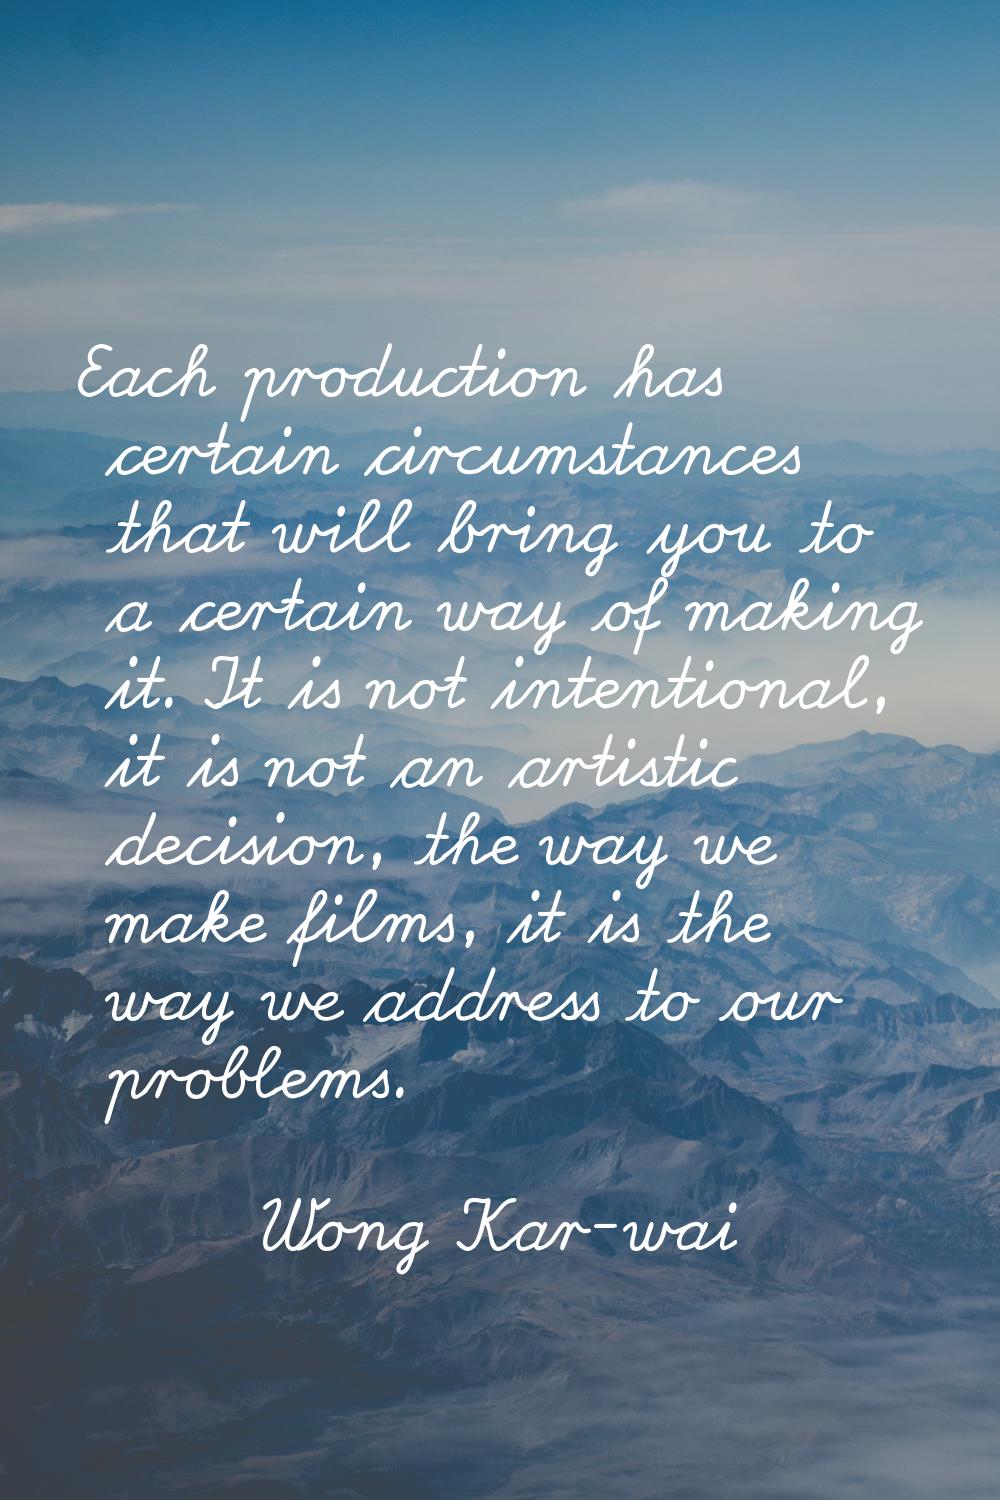 Each production has certain circumstances that will bring you to a certain way of making it. It is 